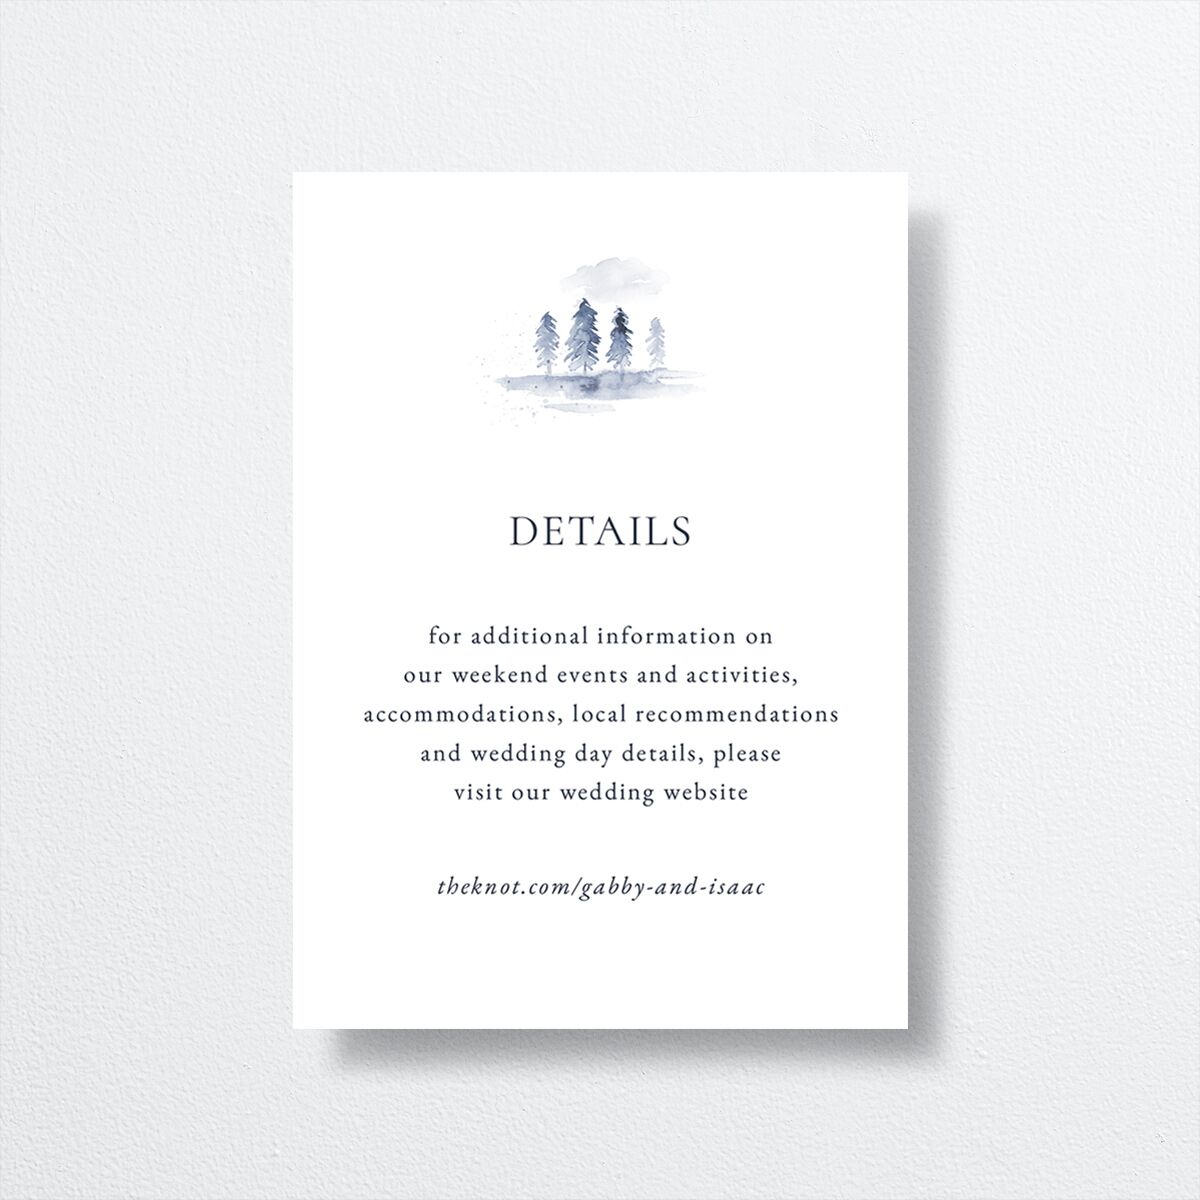 Watercolor Mountains Wedding Enclosure Cards front